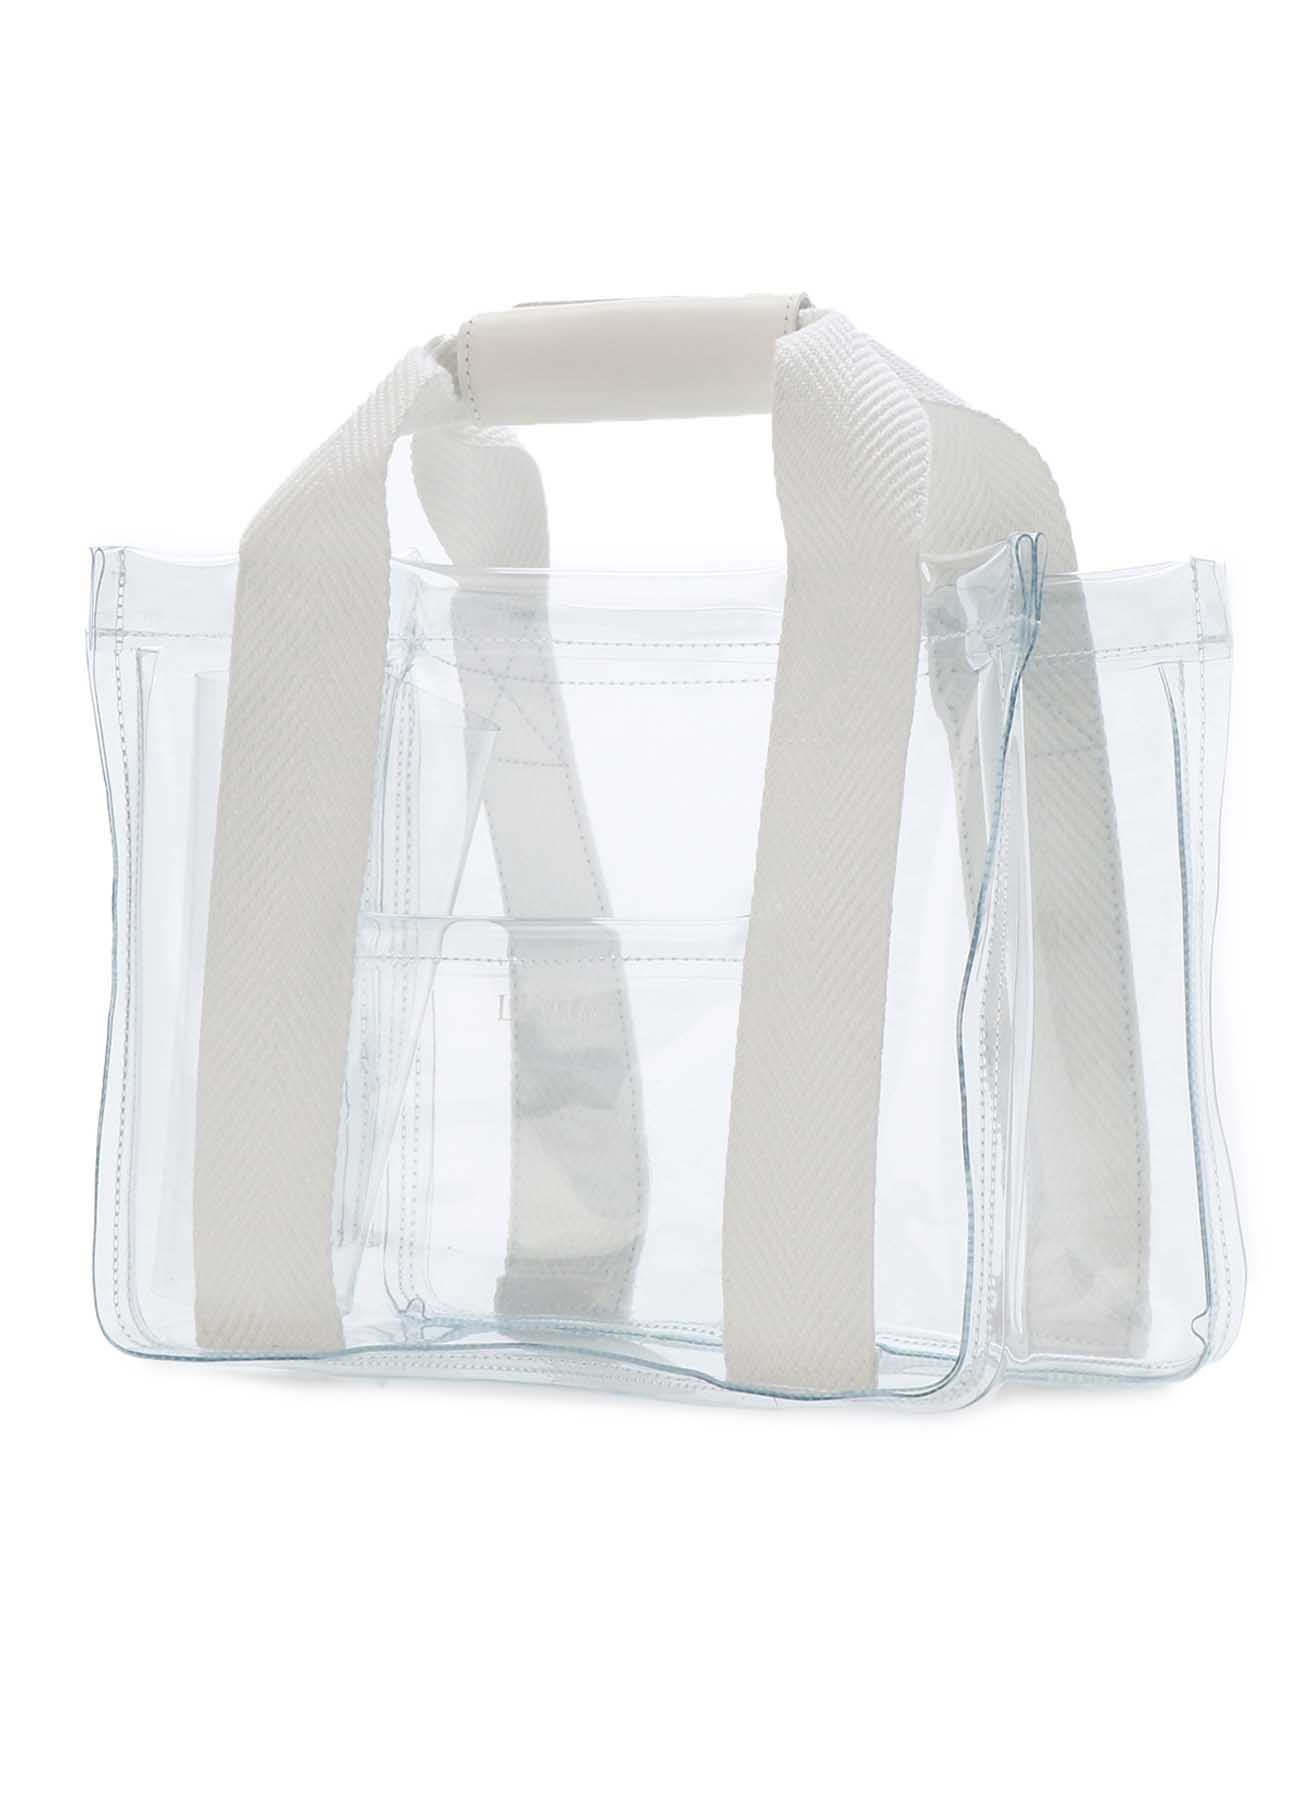 [THE SHOP Limited Product] PVC Hand Bag